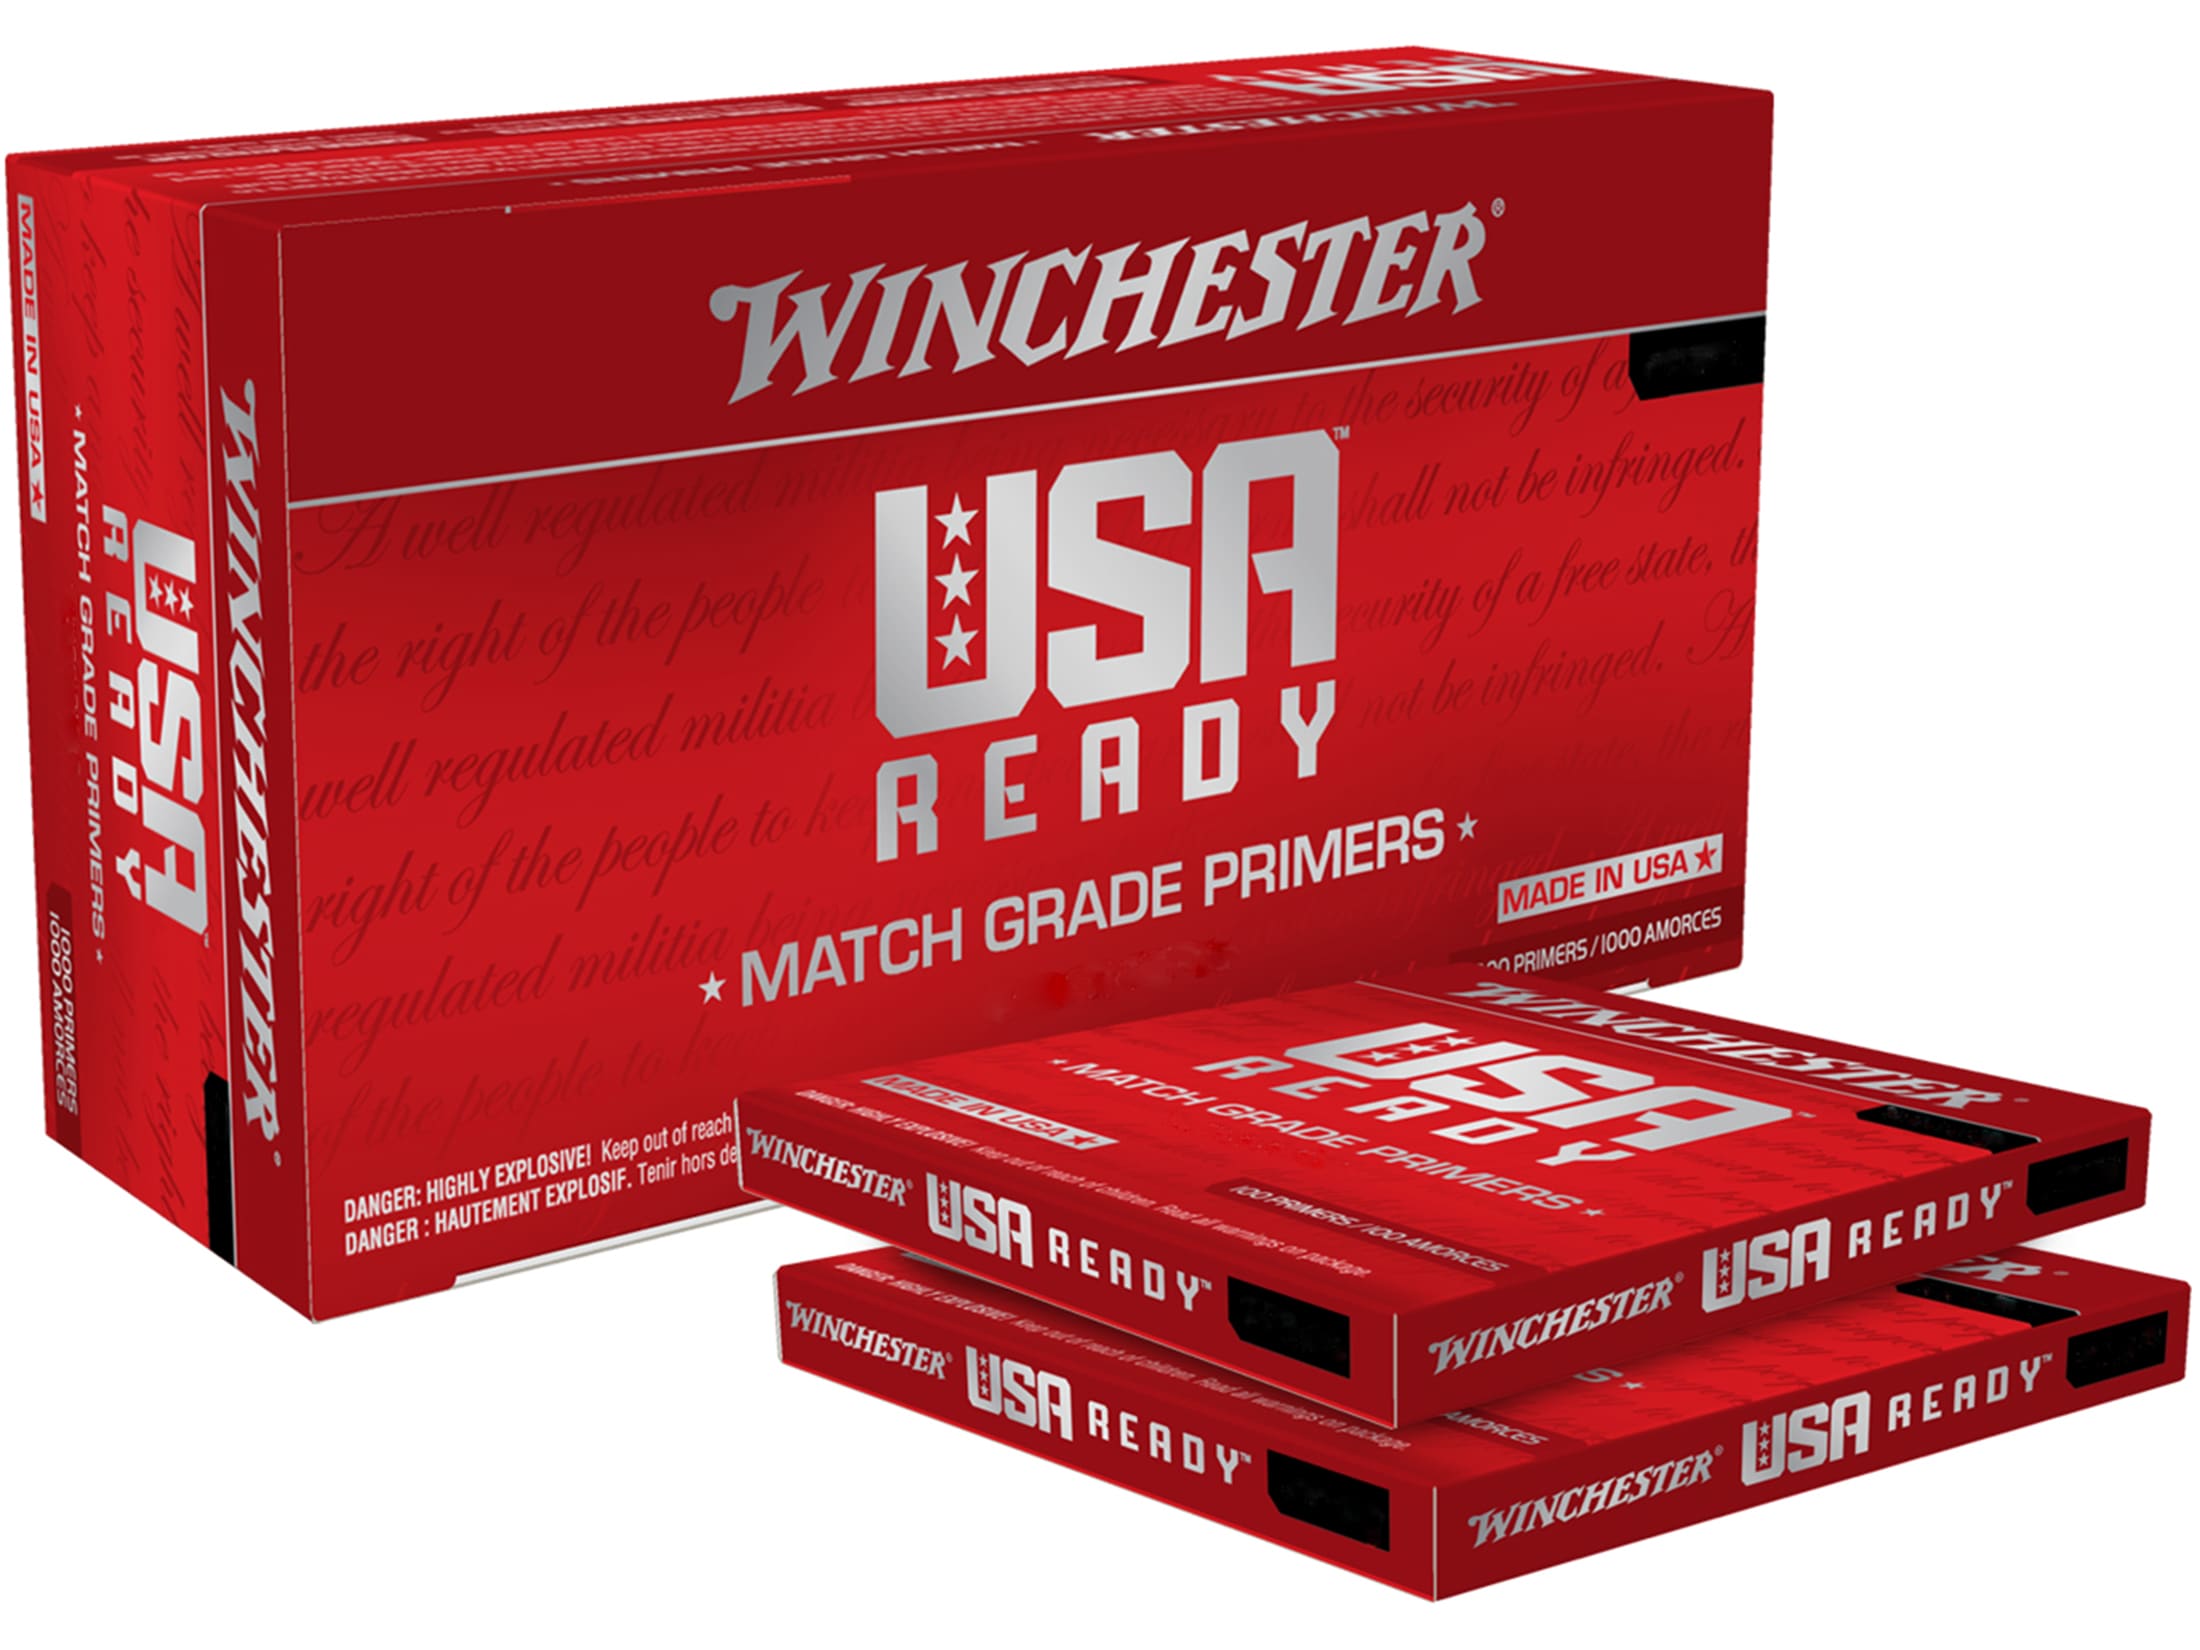 Winchester USA Ready Large Rifle Match Primers Box of 1000 (10 Trays